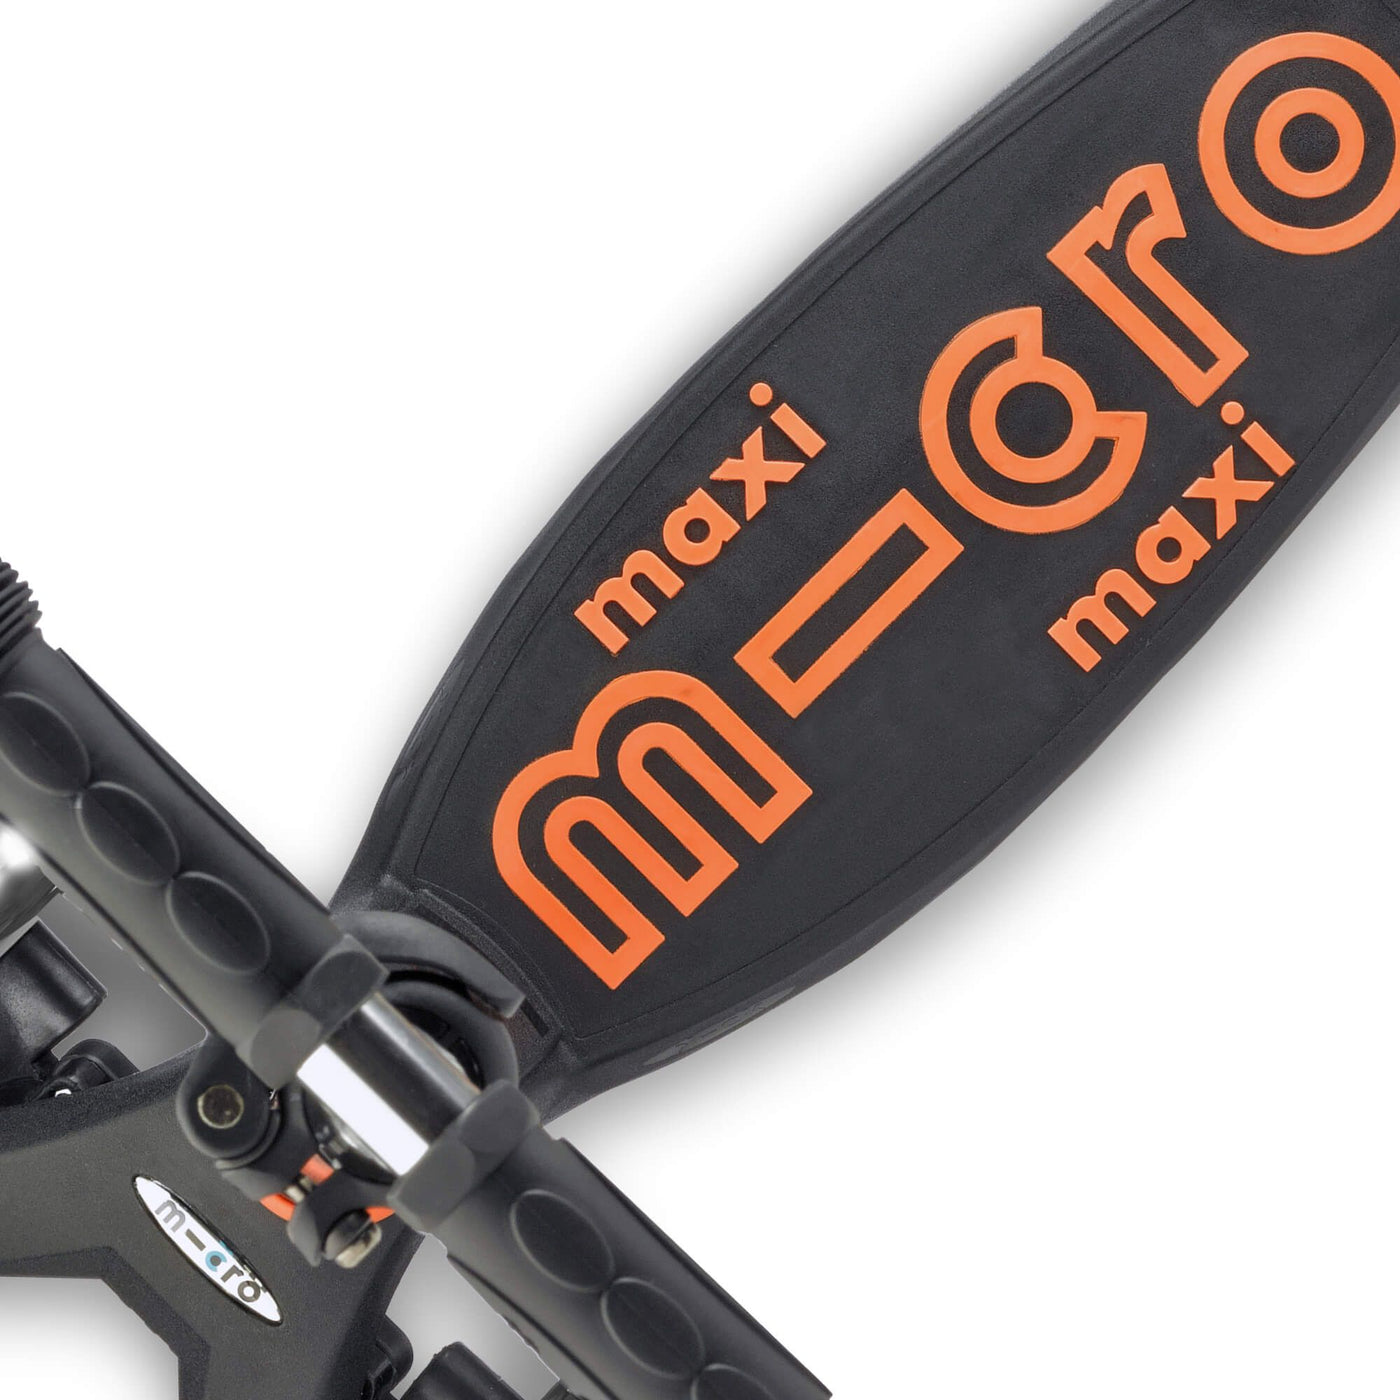 Maxi Micro Deluxe LED Scooter - Black